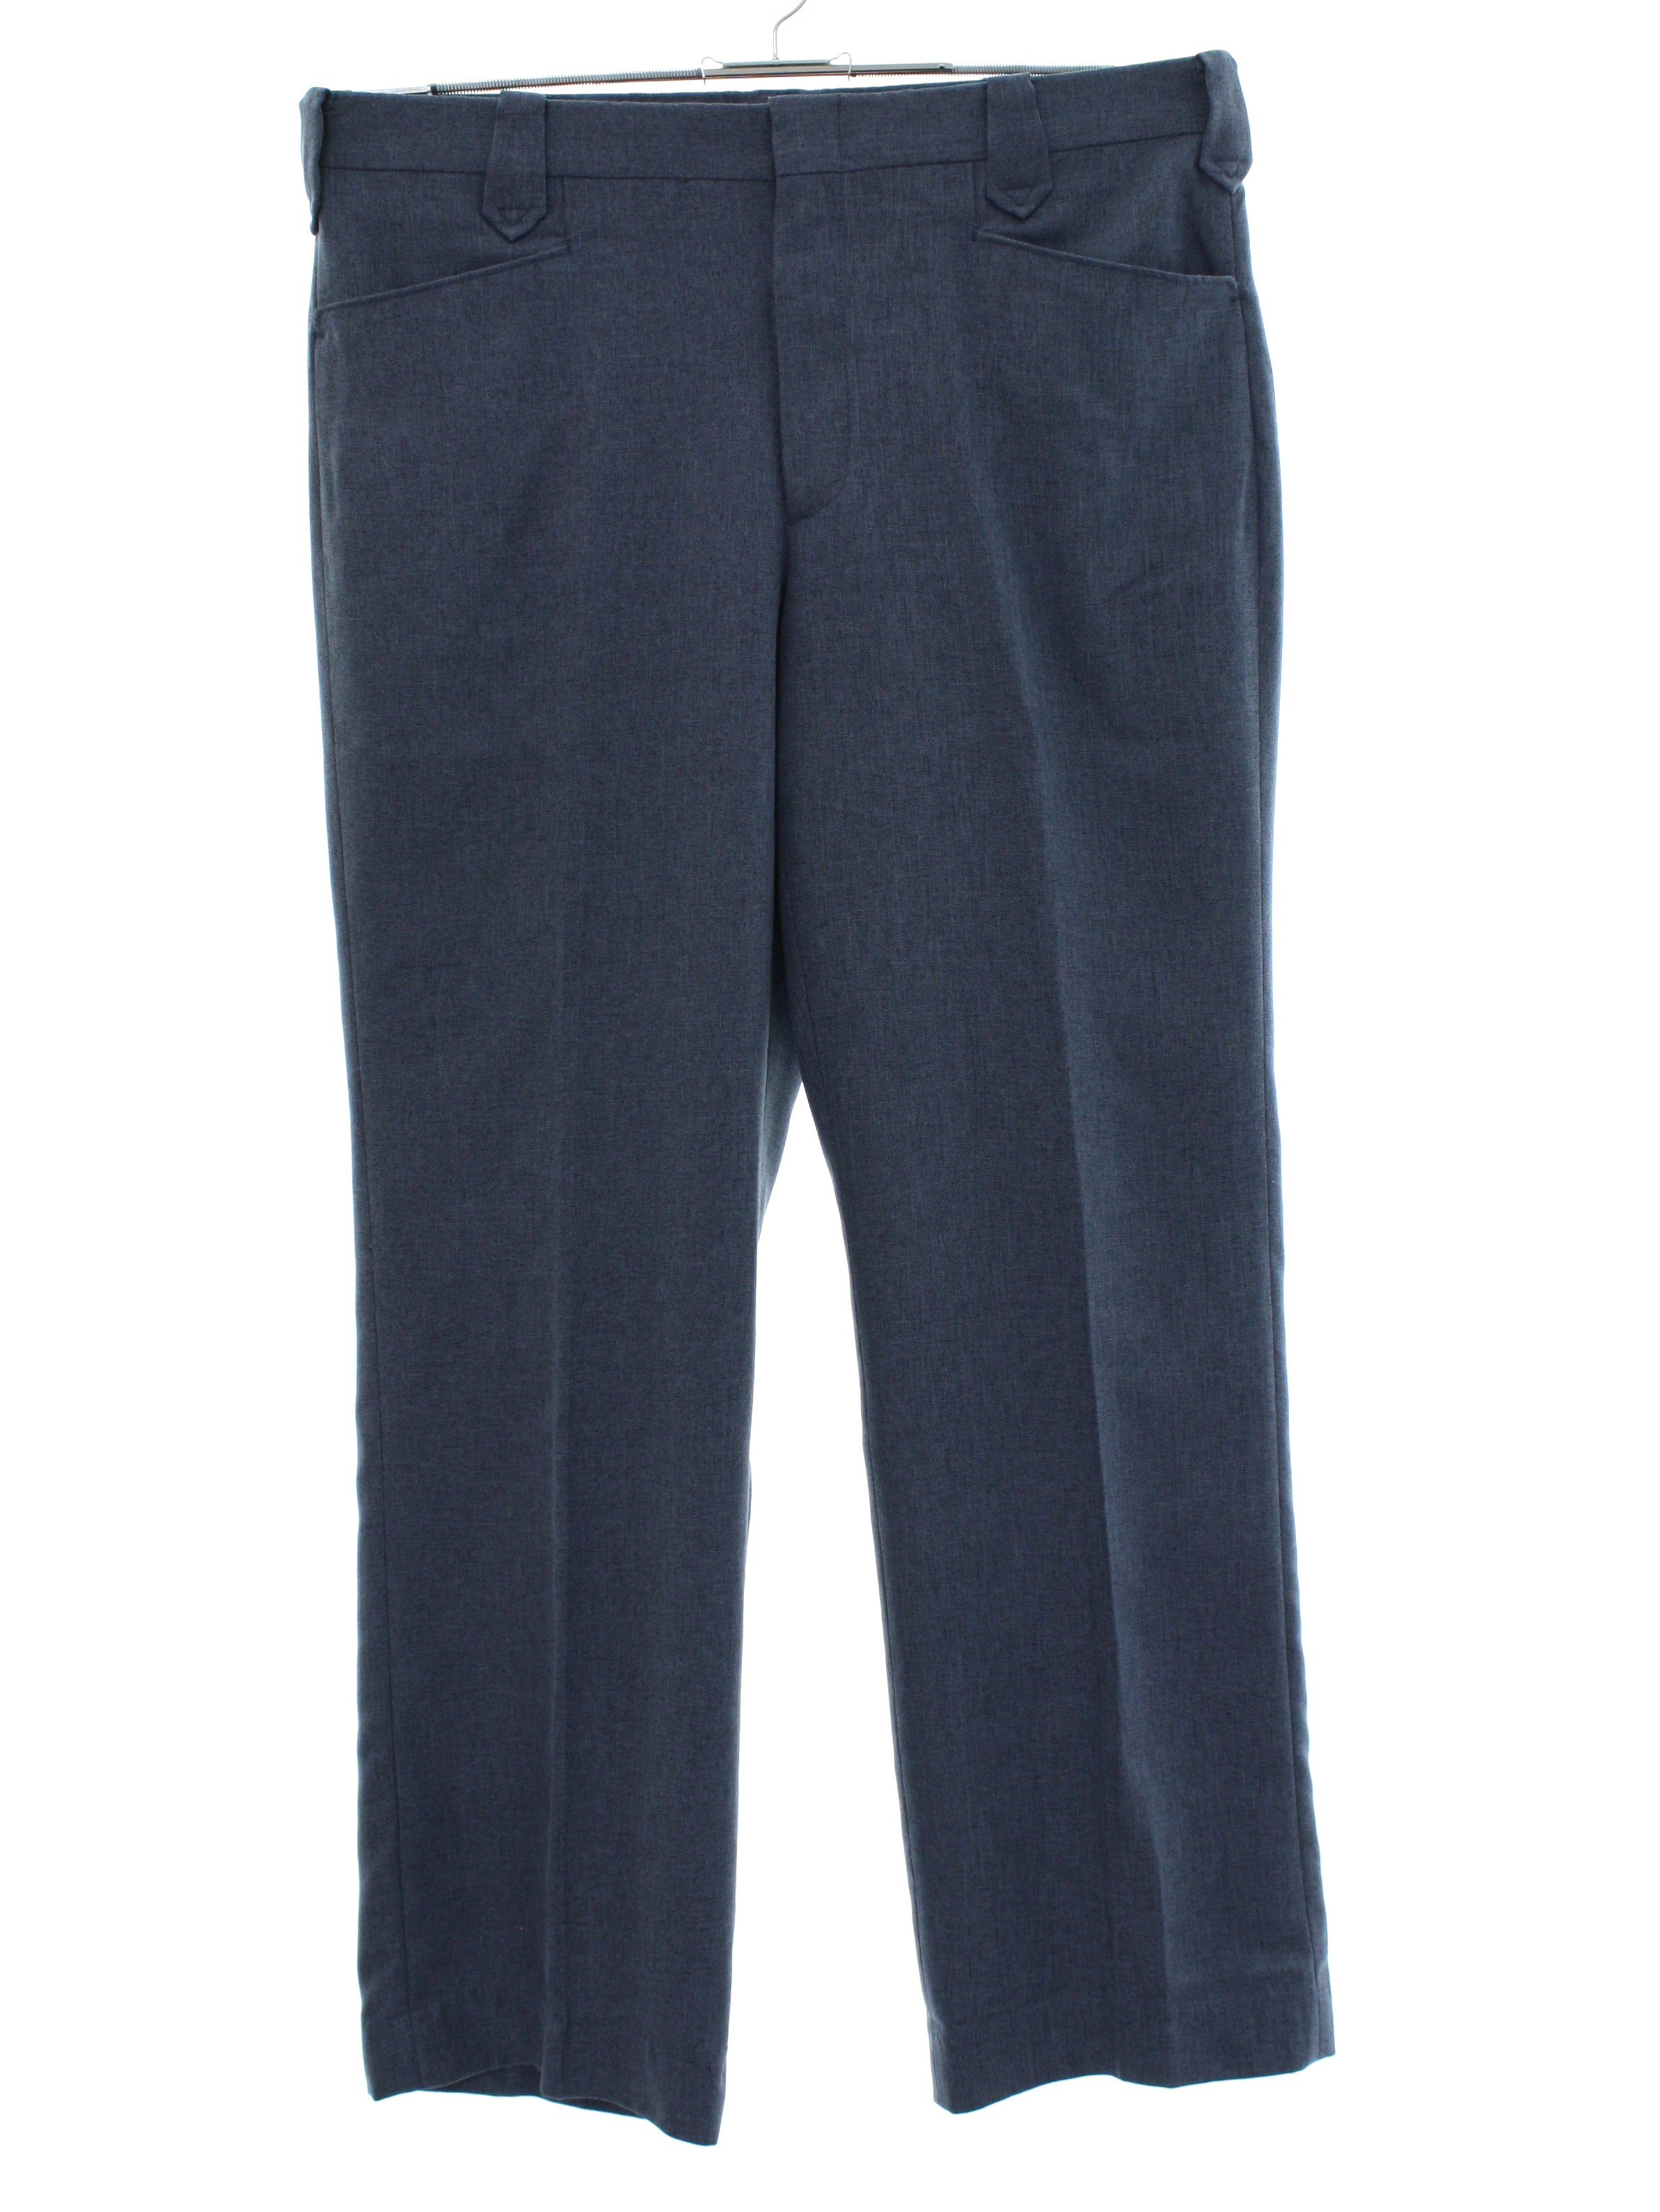 1970's Retro Pants: 70s style (made recently) -Circle S- Mens heathered ...